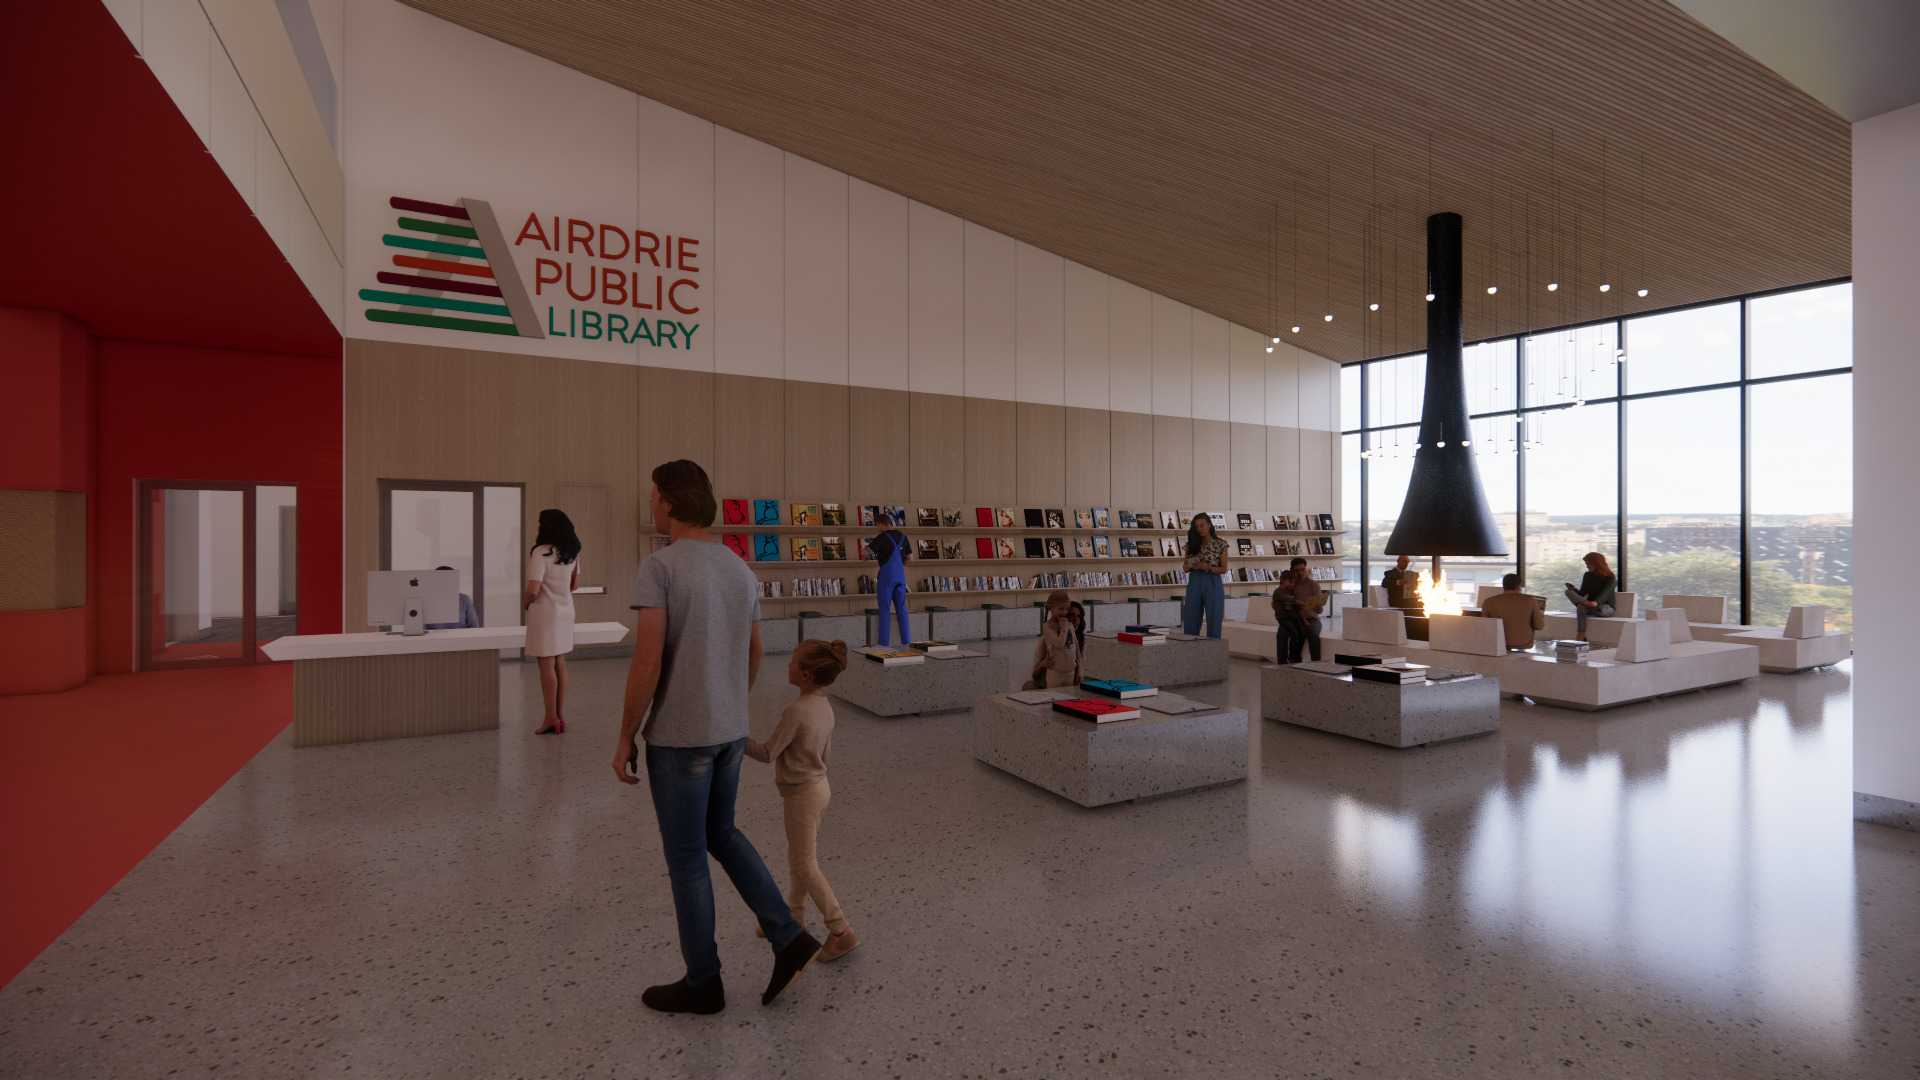 A building lobby with a wall of bookshelves, a fireplace, and low seating. People walking through lobby to library entrance.